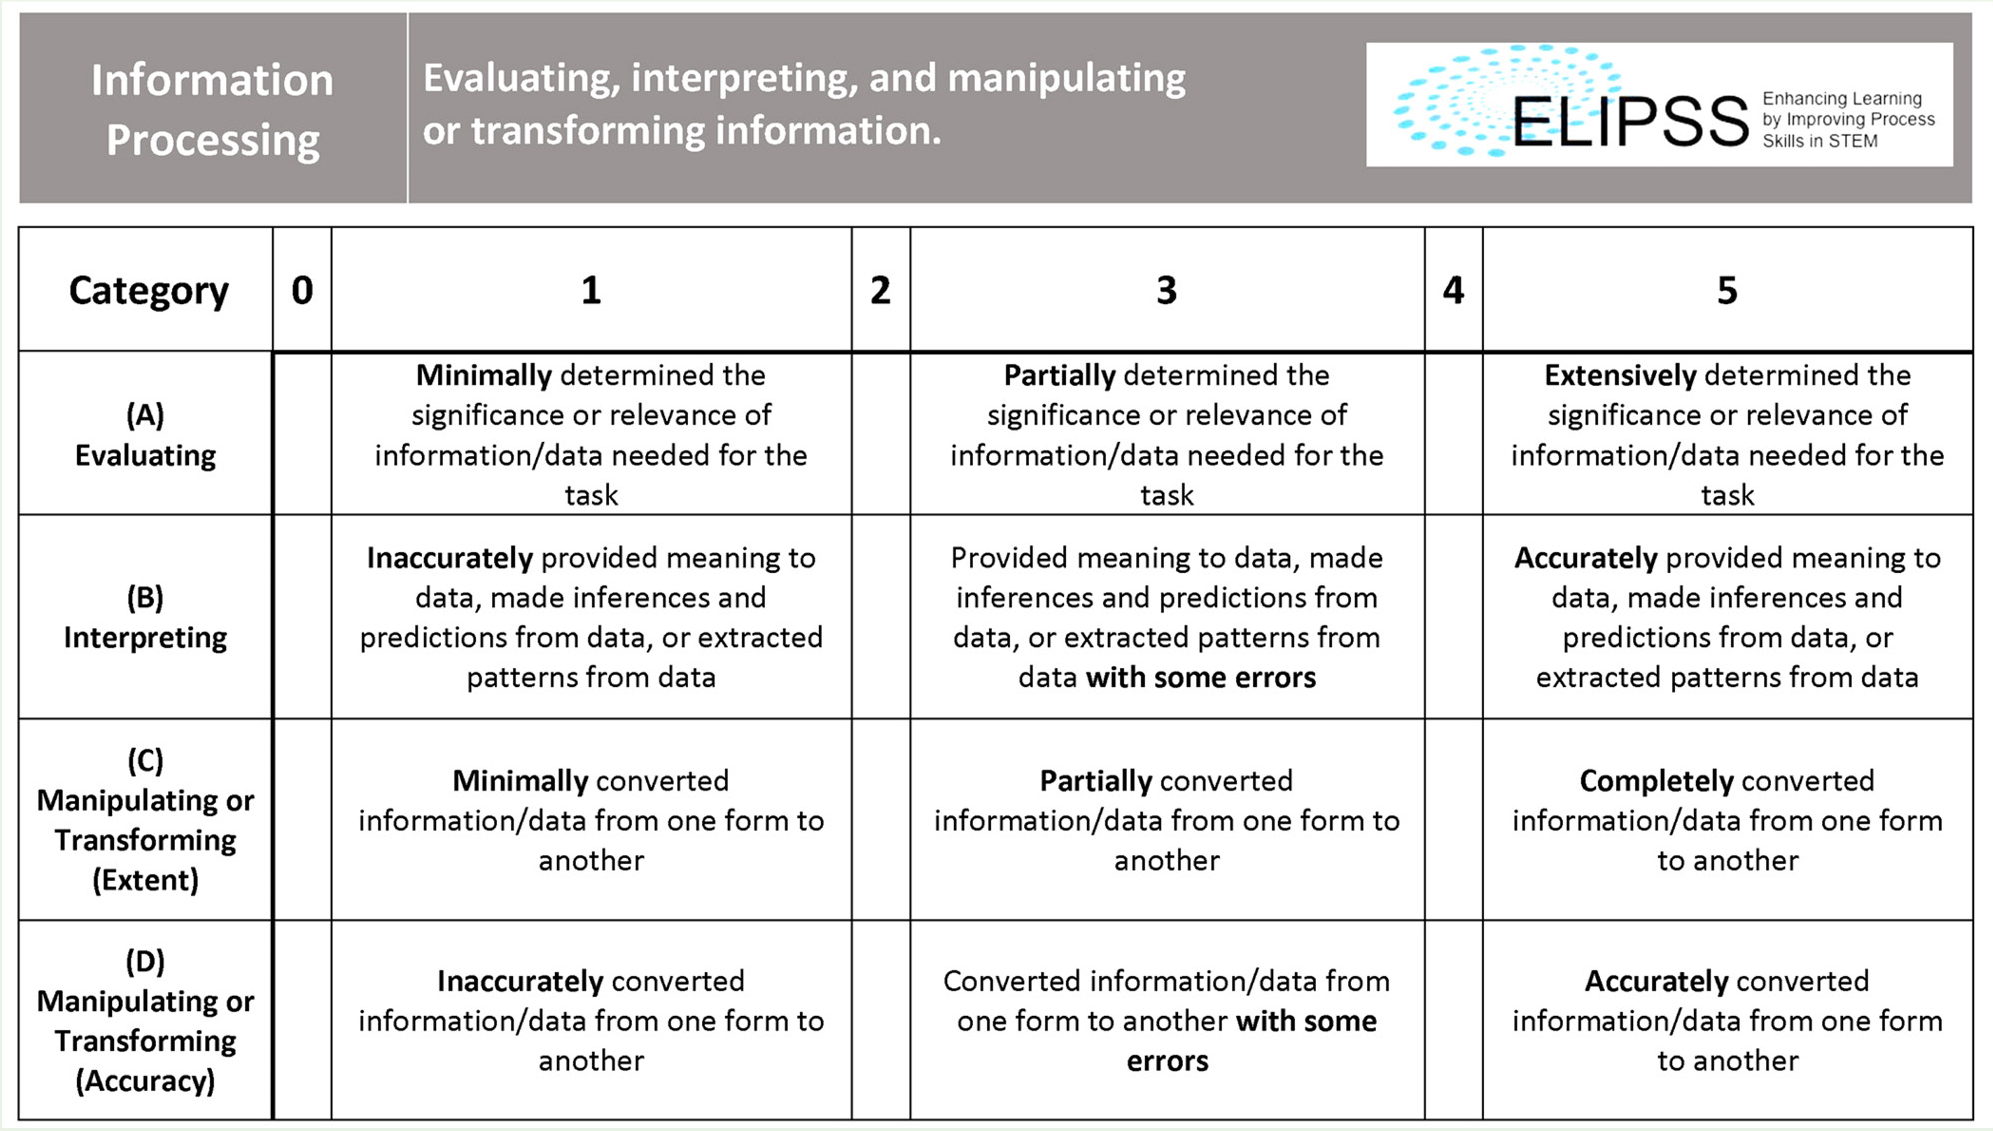 Analytic-style rubric for information processing. The definition for information processing is provided at the top of the rubric followed by four aspects of information processing that are each assessed as separate rubric categories. (Used with permission of the ELIPSS project.)